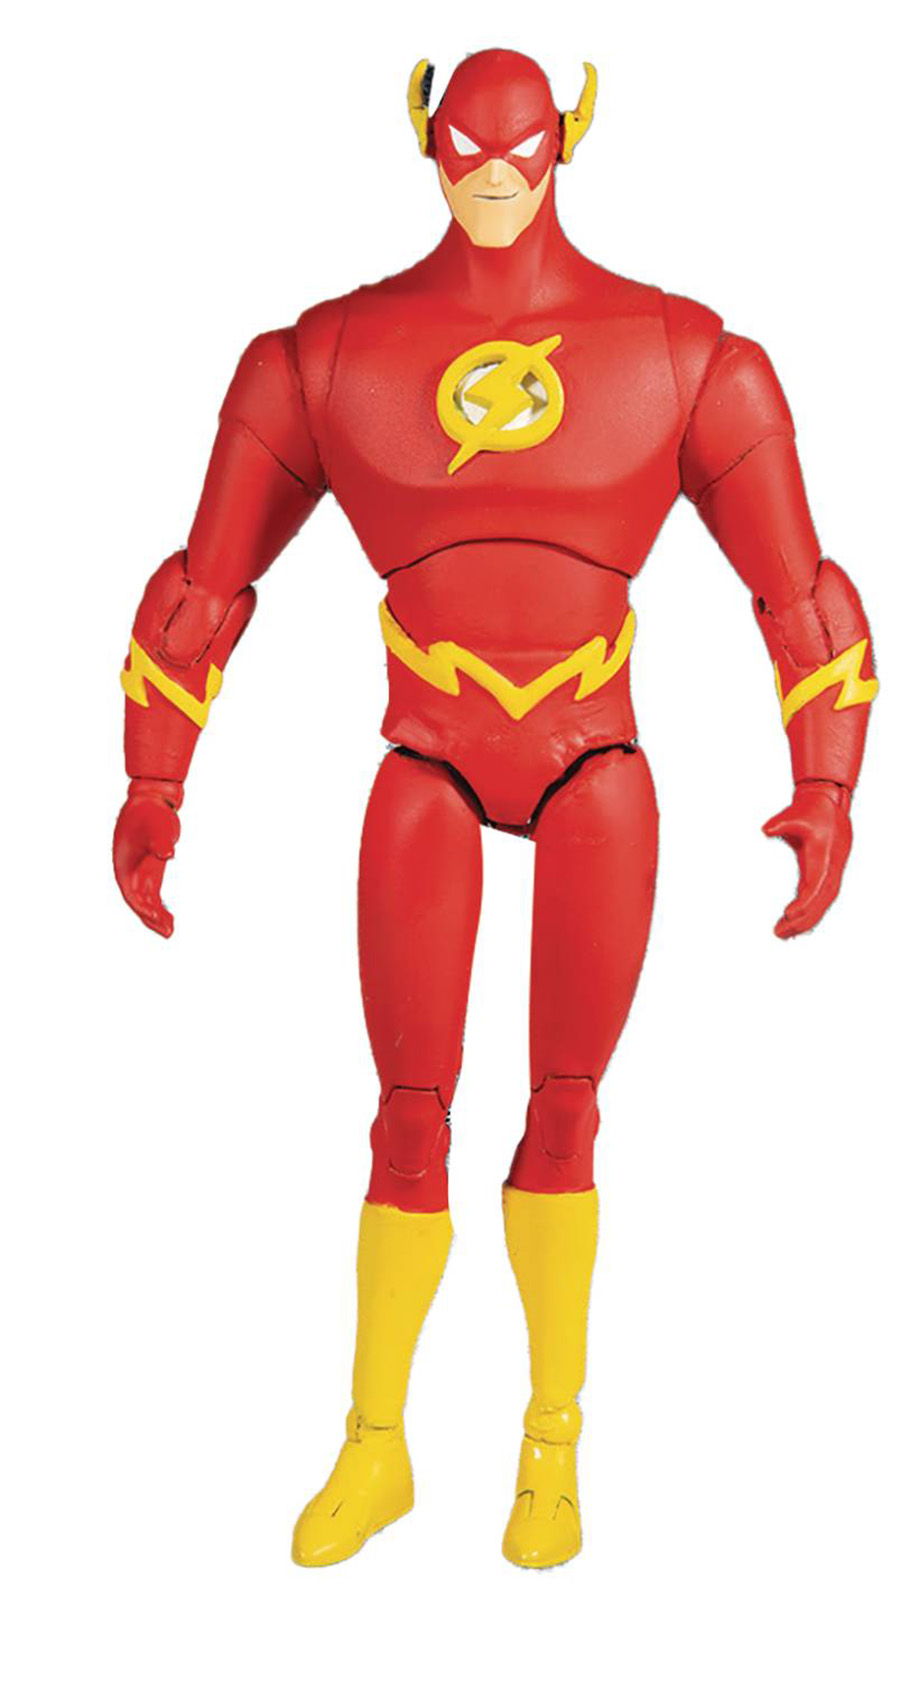 DC Multiverse Flash (Superman The Animated Series) 7-Inch Scale Action Figure Case